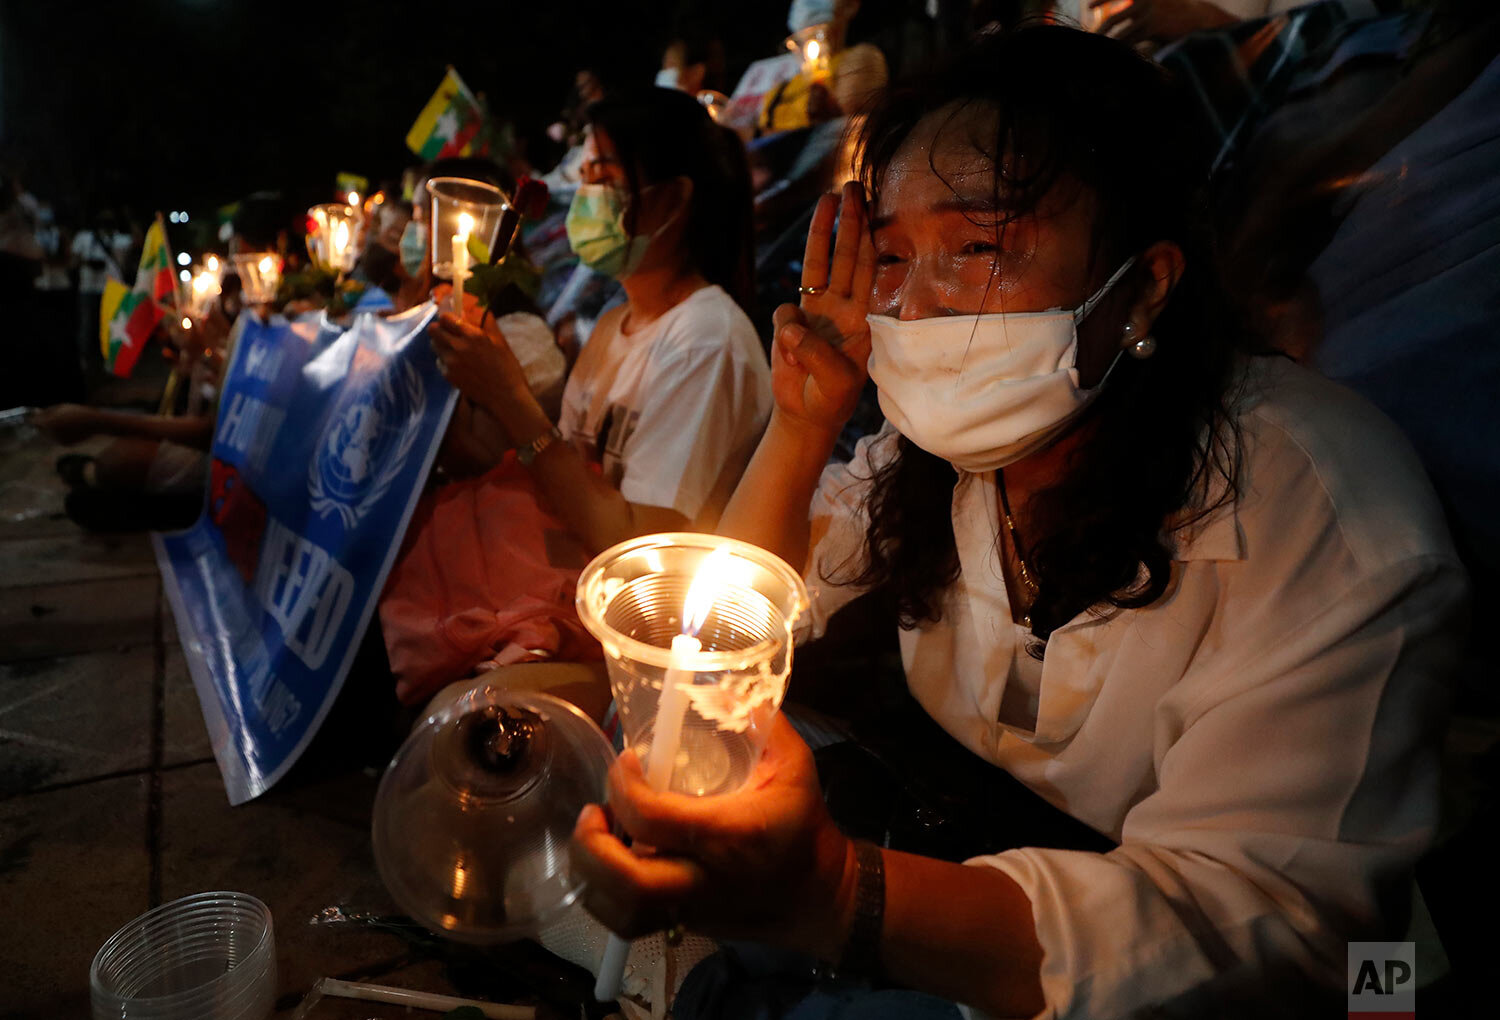  Myanmar nationals living in Thailand participate in a candle light vigil gesture with a three-finger sign of resistance against the Myanmar military coup in front of the United Nations building in Bangkok, Thailand, Thursday, March 4, 2021. (AP Phot